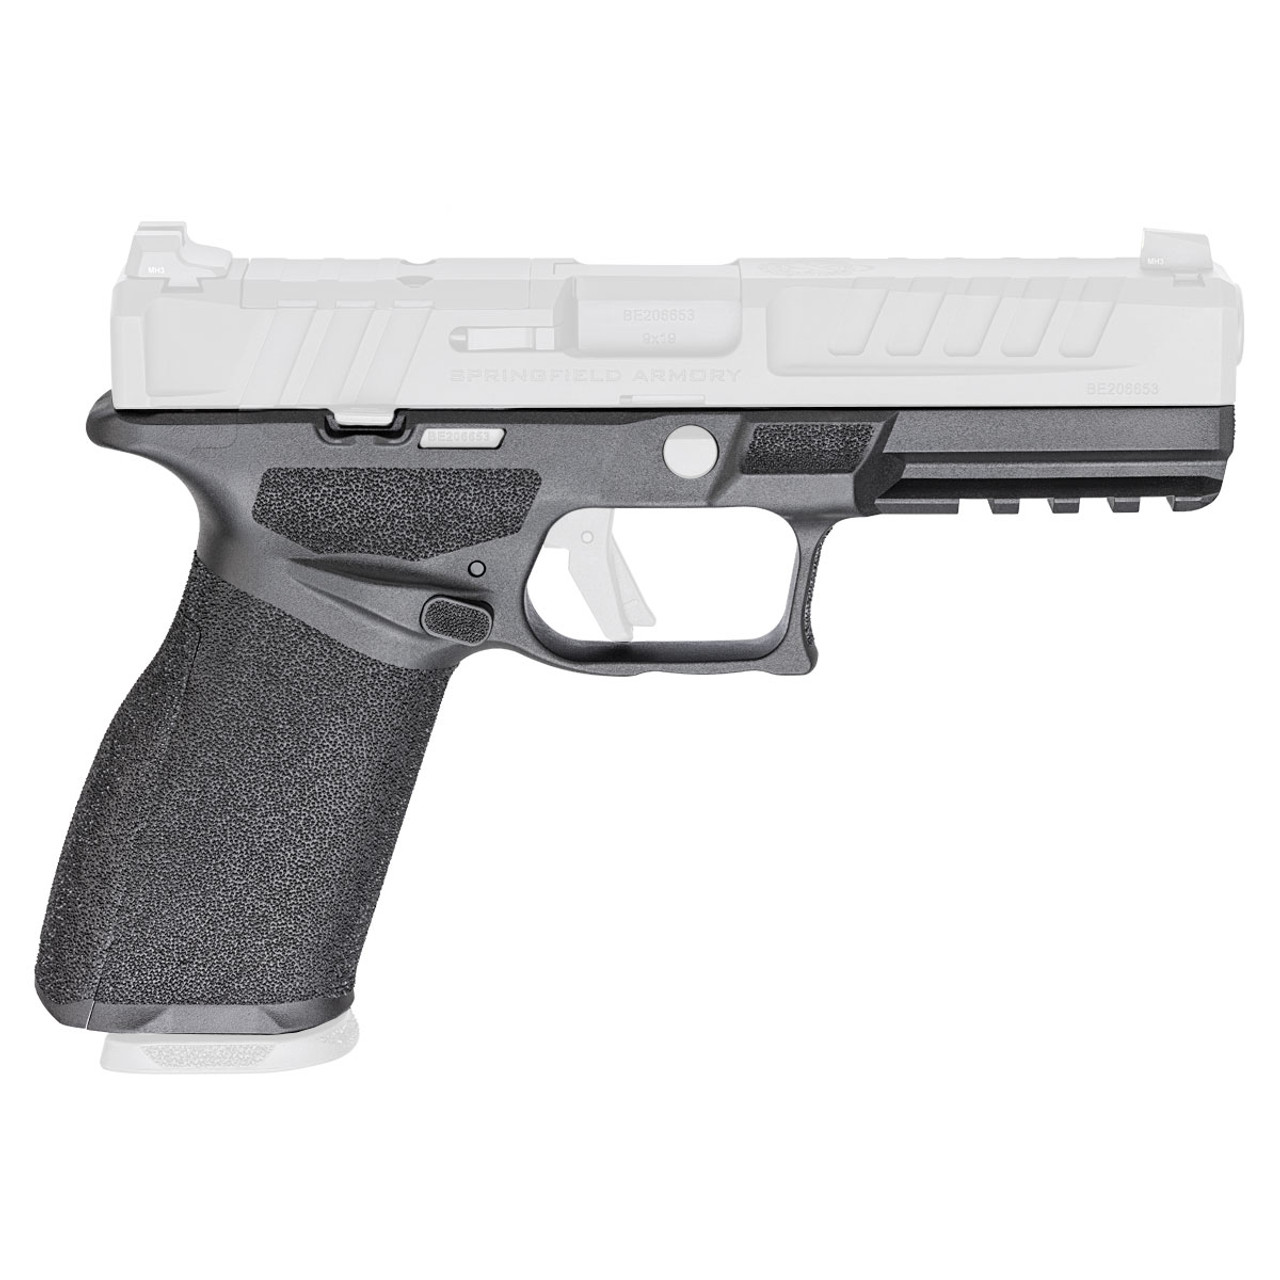 Springfield Armory EC1001STRET Echelon Grip Module Small, Standard Texture, Black Polymer, Ambi Mag Release, Includes 3 Interchangeable Backstraps